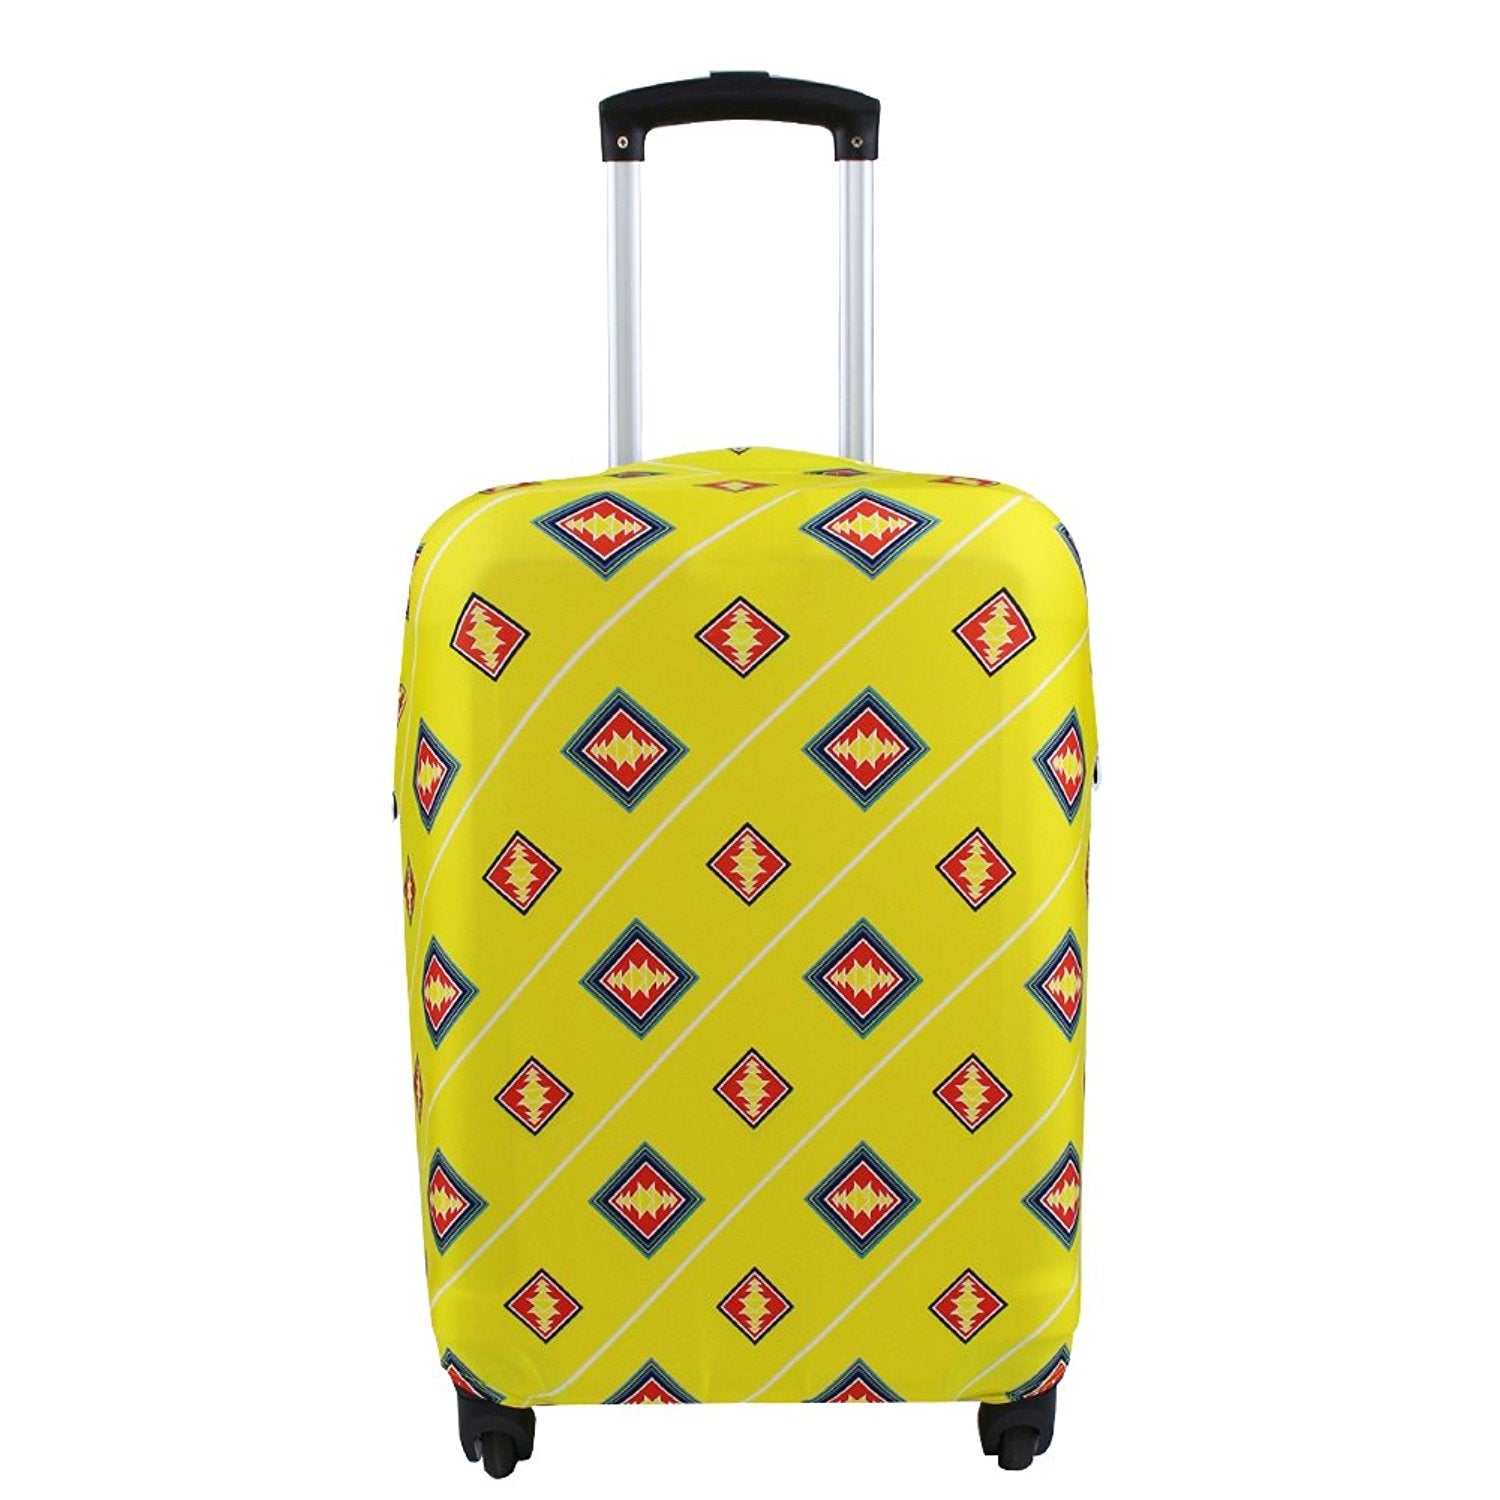 Luggage Cover Travel Luggage Cover Dust Cover for 18-32 Suitcase